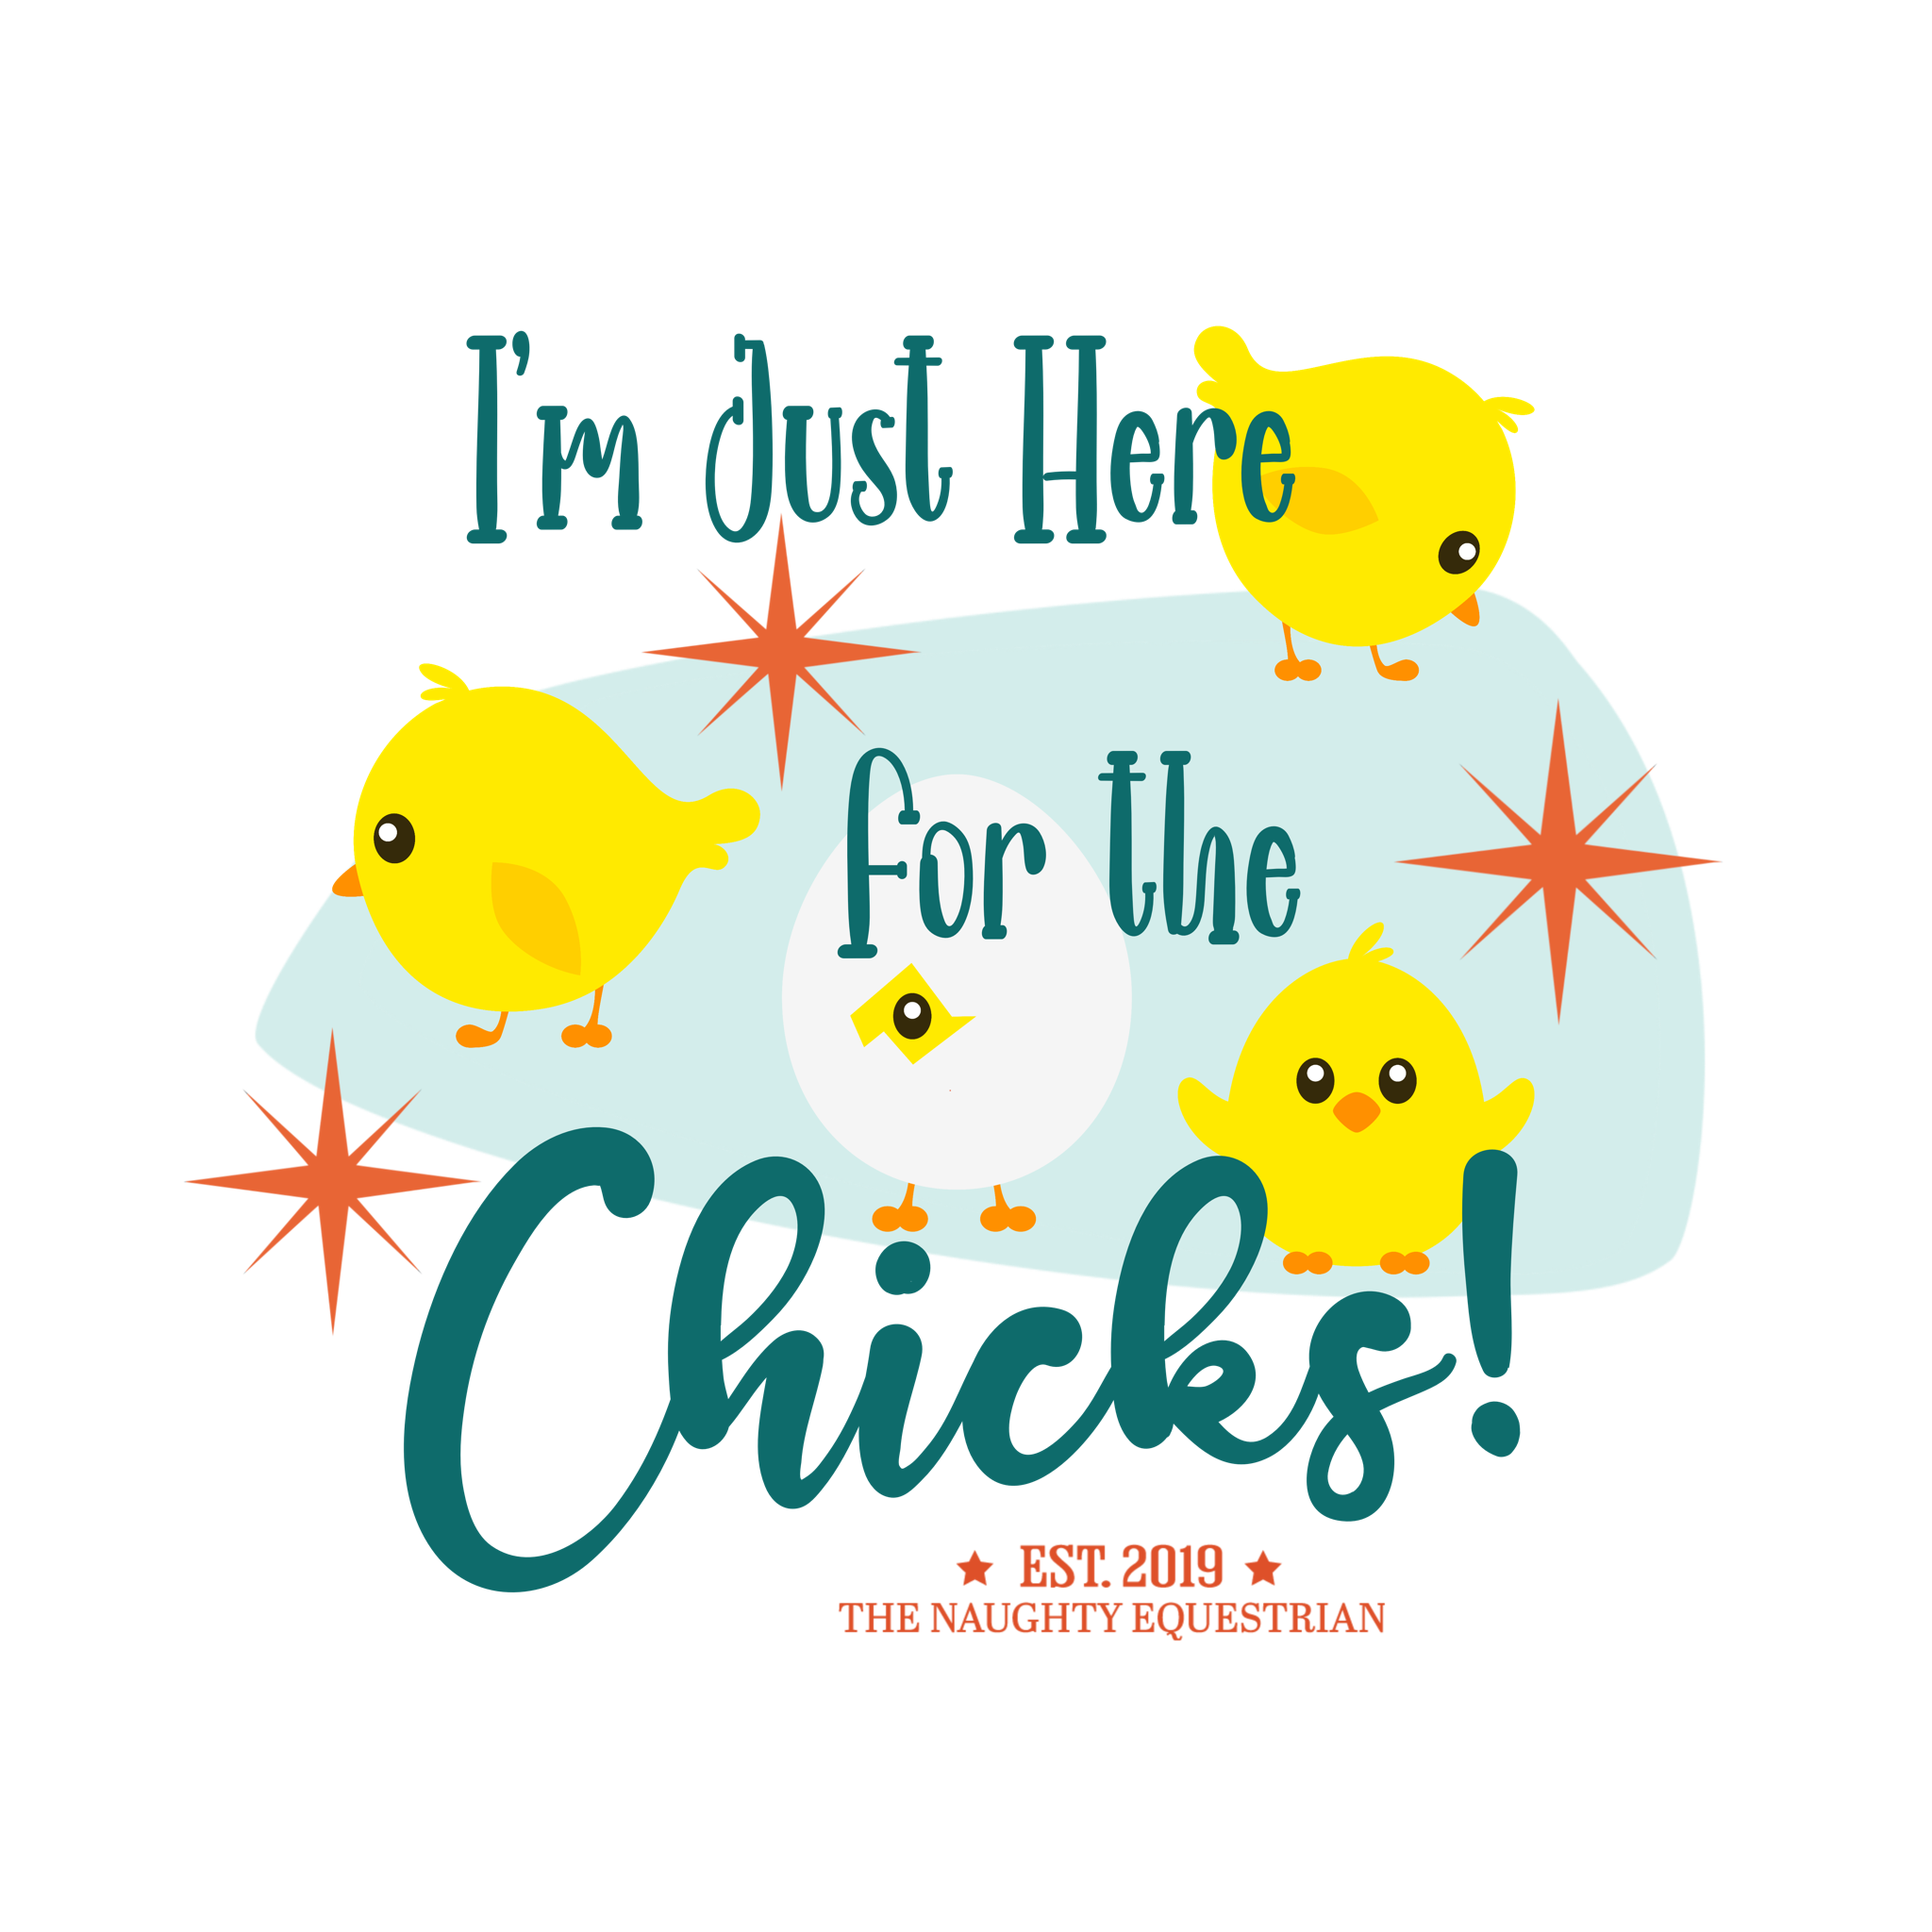 I'm Just Here for the Chicks Chicken Sticker, Vinyl Decal